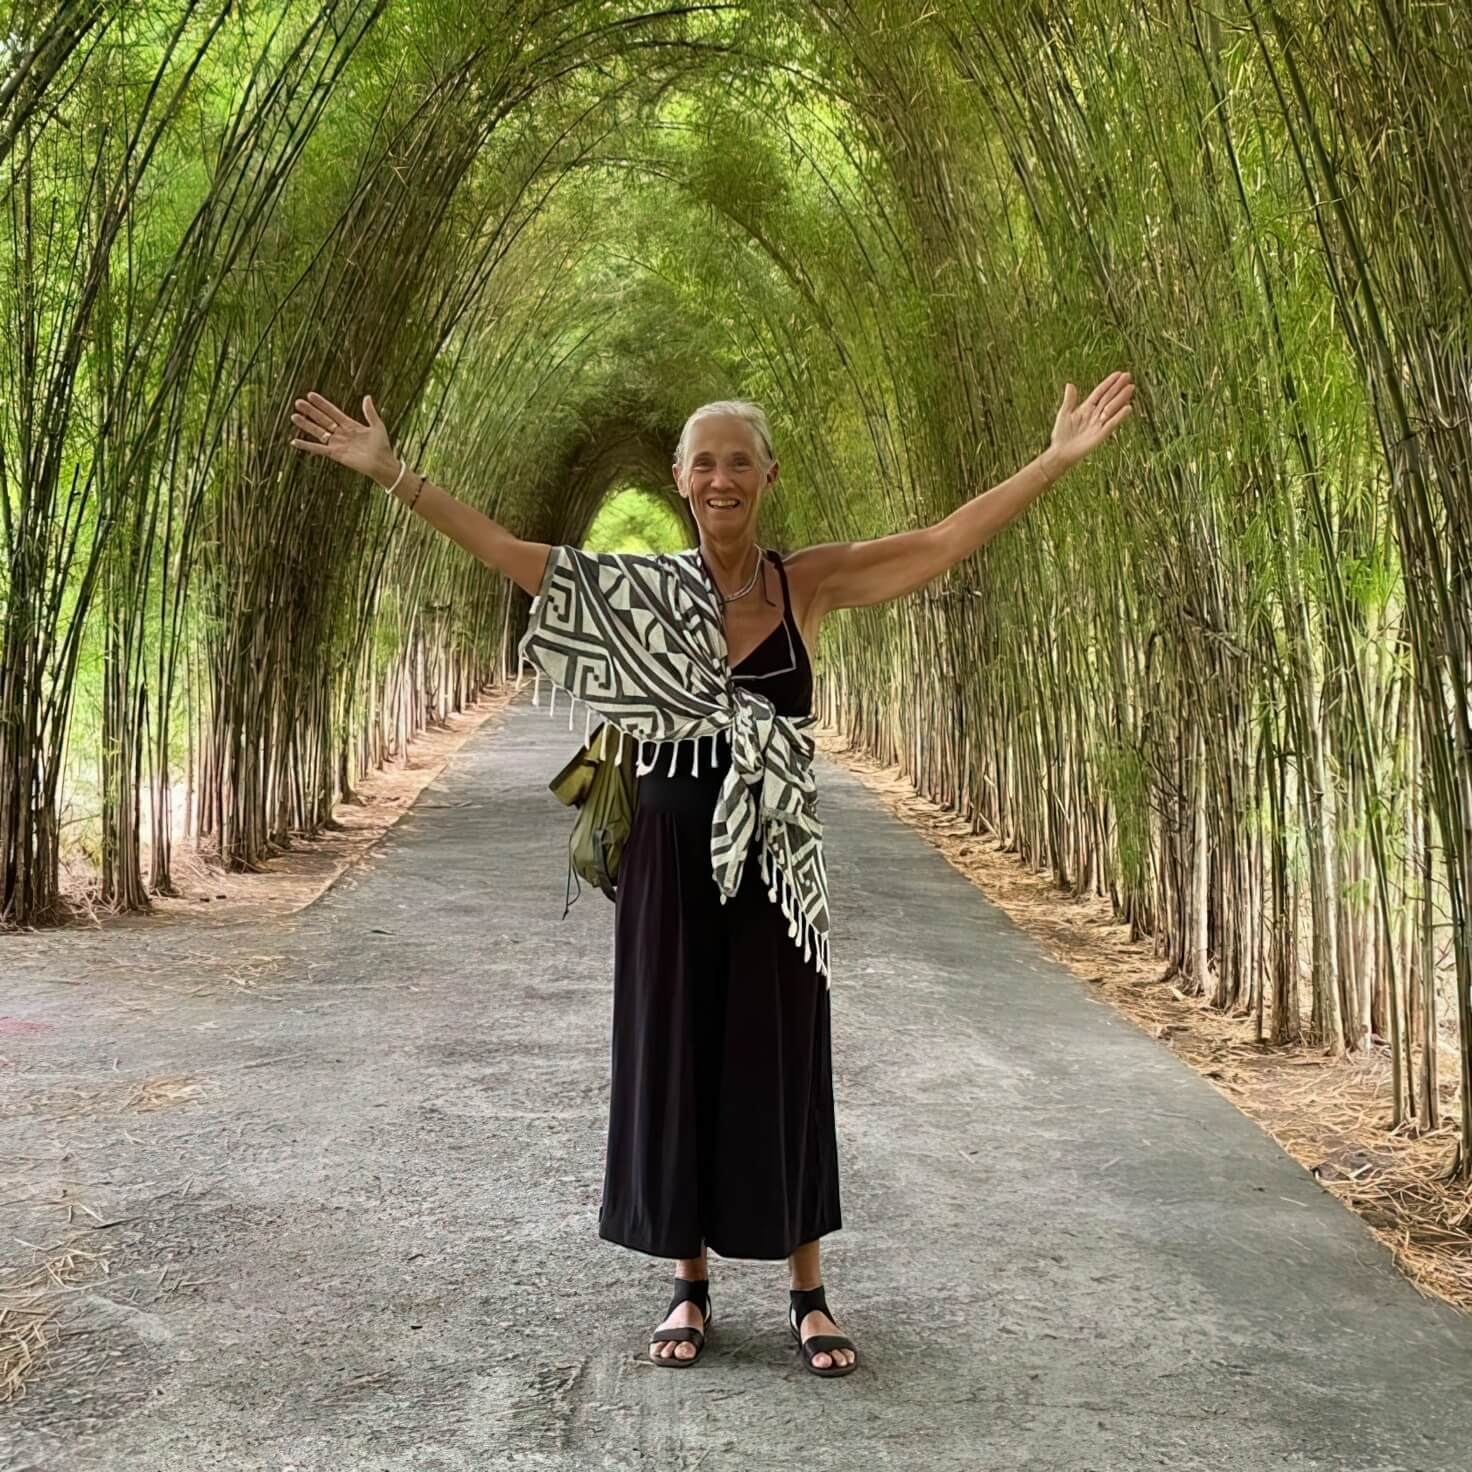 Beth standing in tunnel of greenery in Bali